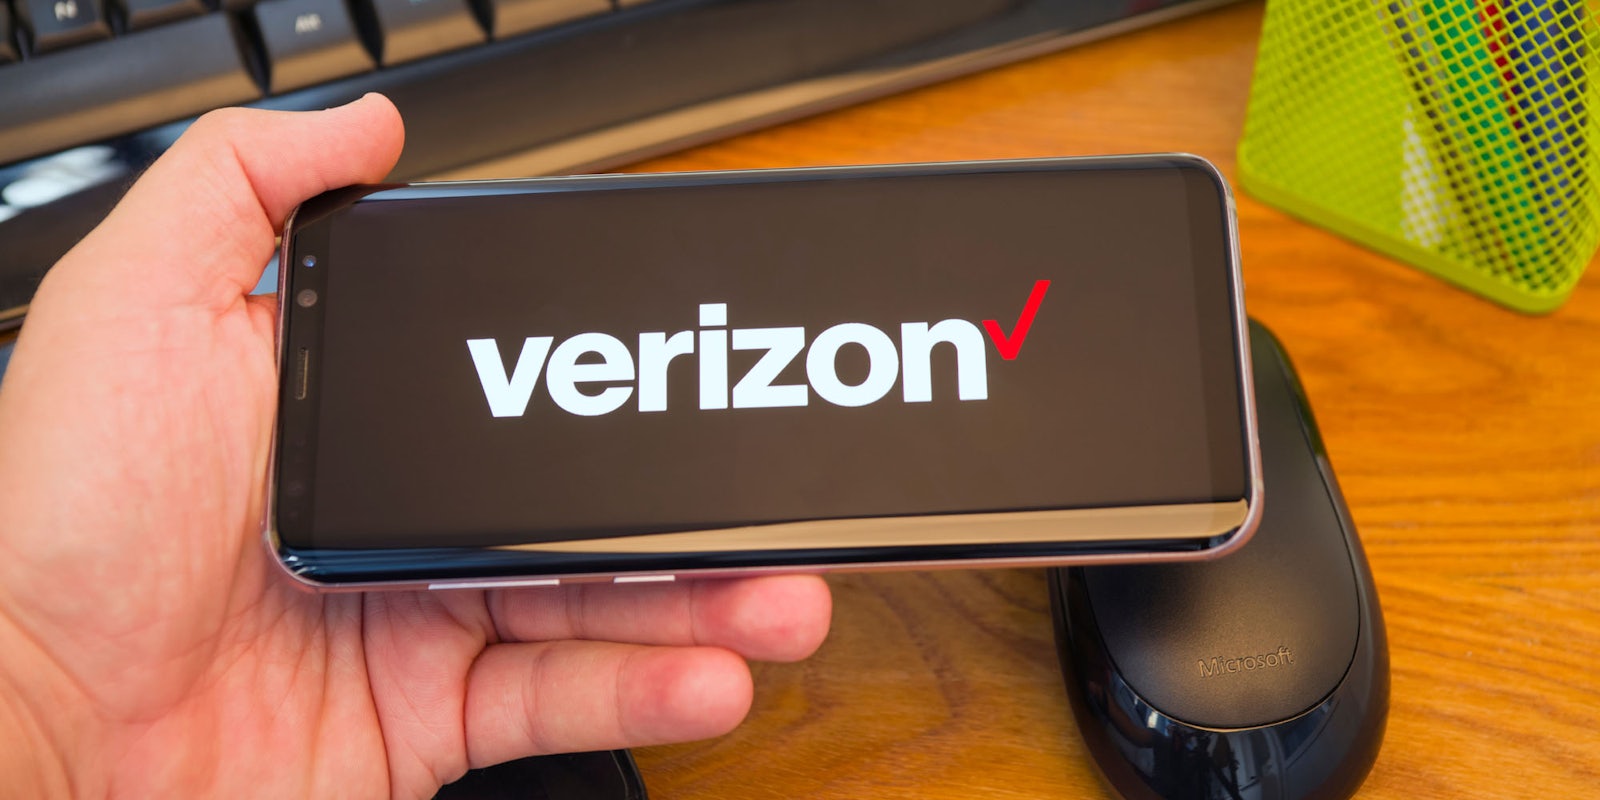 A person holds a smartphone with the Verizon logo on it.